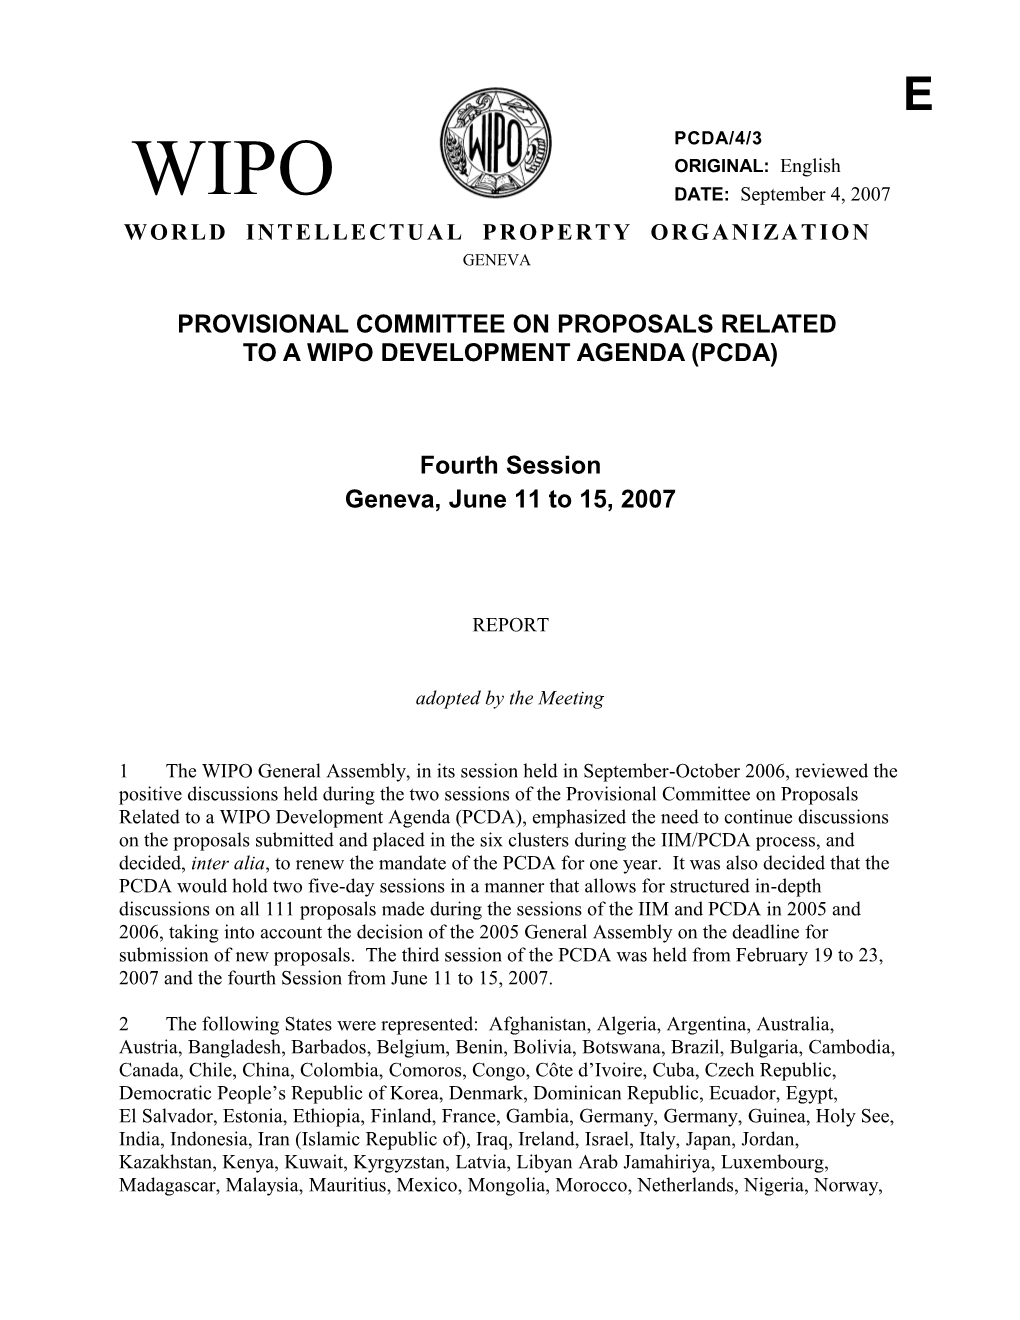 PROVISIONAL COMMITTEE on PROPOSALS RELATED to a WIPO Development Agenda (Pcda)